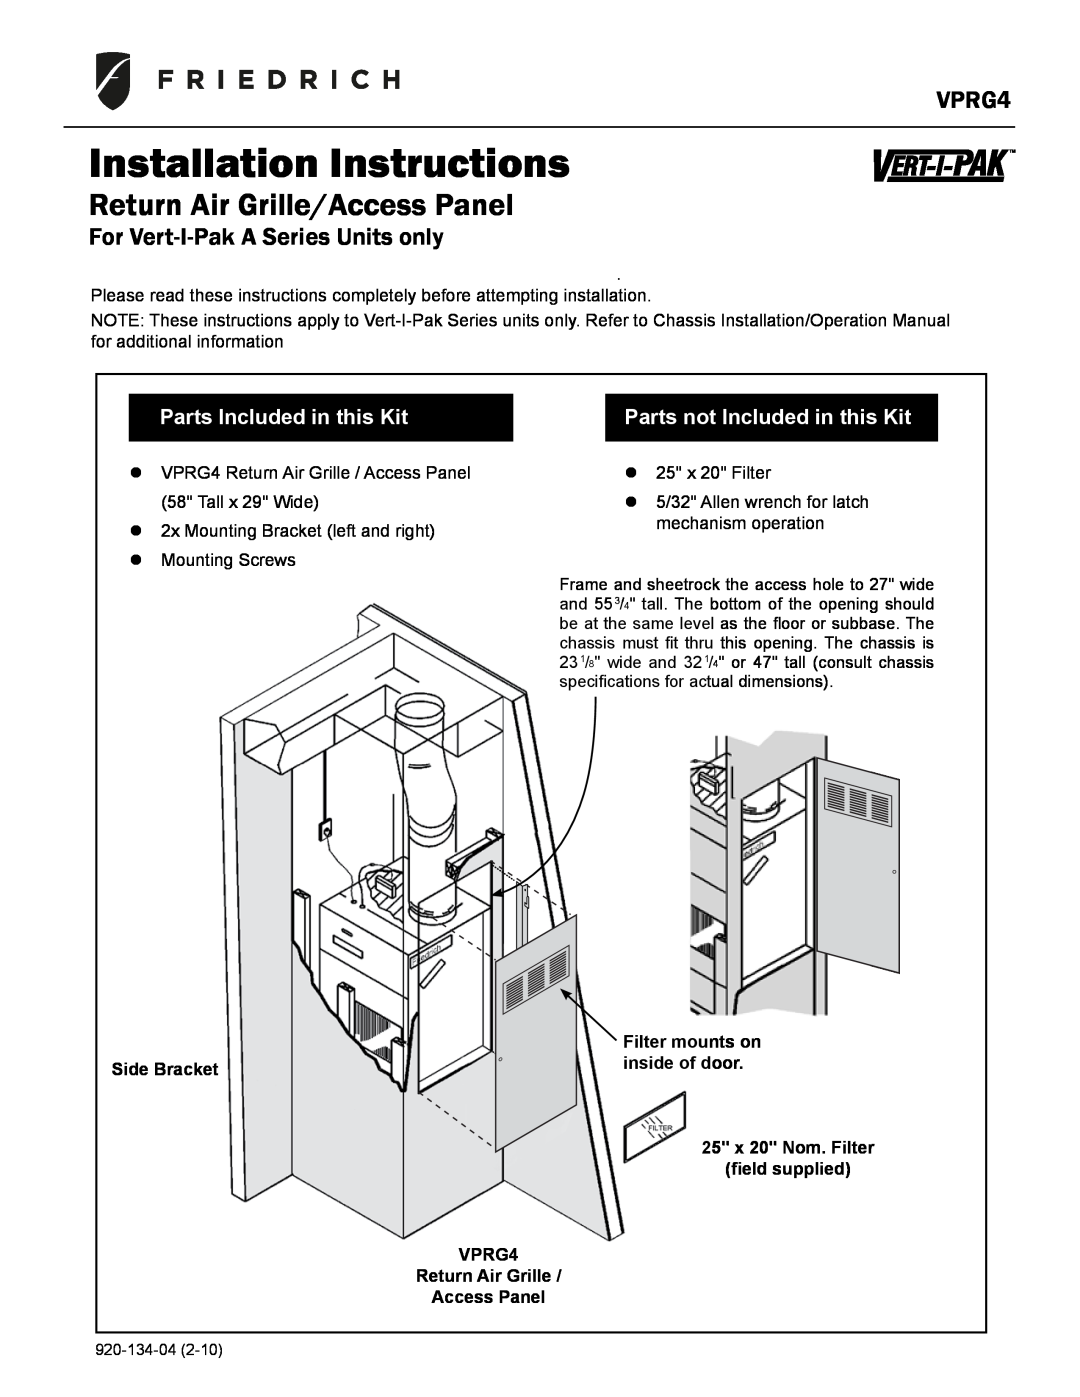 Friedrich VPRG4 installation instructions Installation Instructions, Return Air Grille/Access Panel, Filter mounts on 